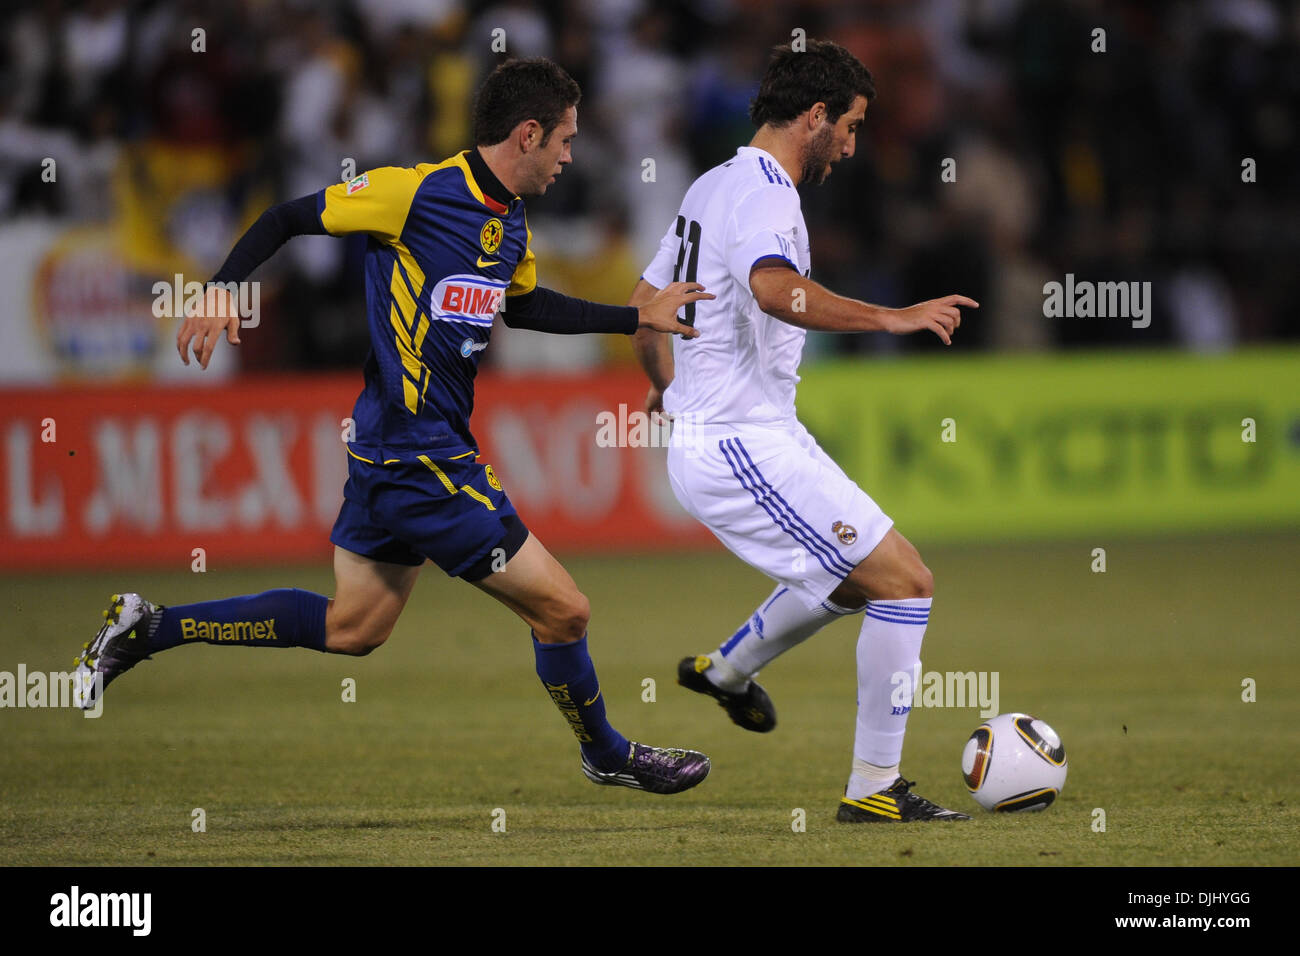 Aug. 04, 2010 - San Francisco, California, U.S - August 4, 2010: Club America M Miguel Layun (19) shadows Real Madrid F Gonzalo Higuain (20) during the friendly between Real Madrid and Club America at Candlestick Park in San Francisco, CA.  Real Madrid took the contest 3-2. (Credit Image: © Matt Cohen/Southcreek Global/ZUMApress.com) Stock Photo